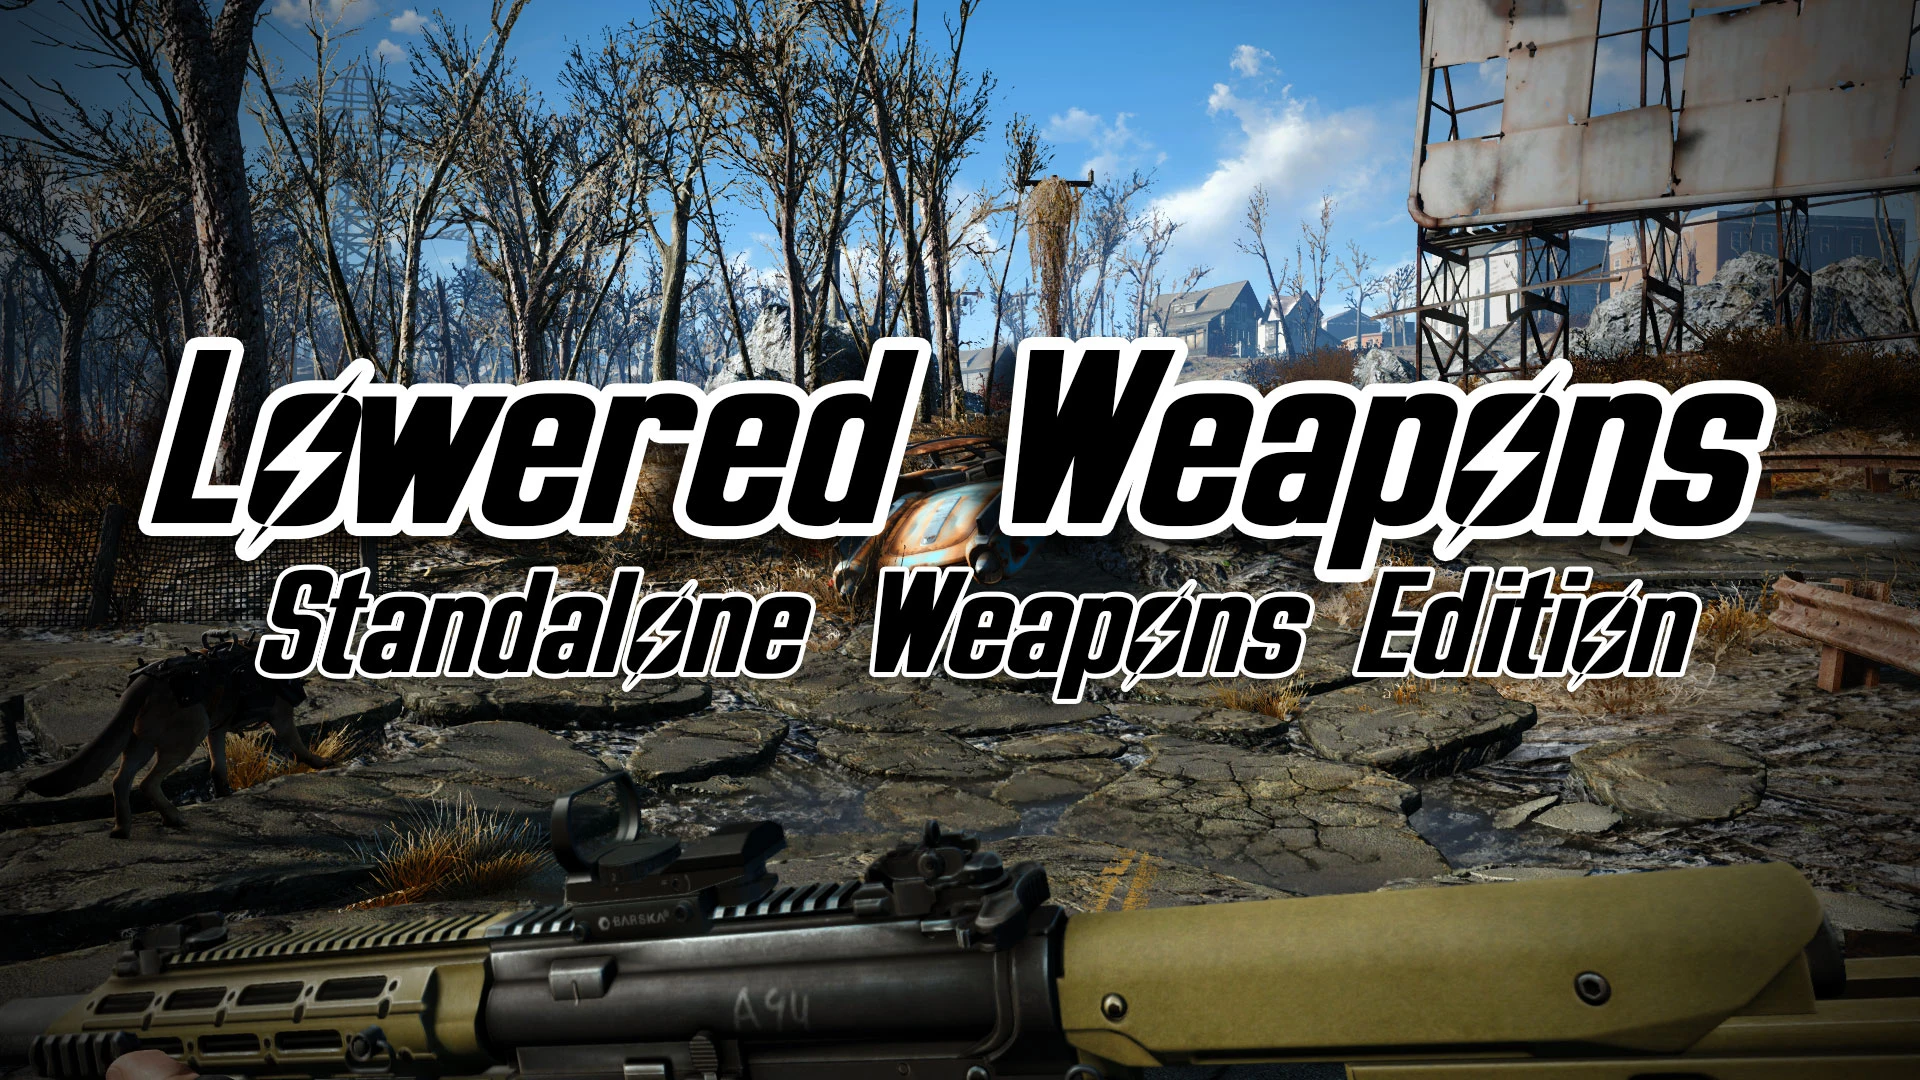 Fallout 4 lowered weapons фото 6